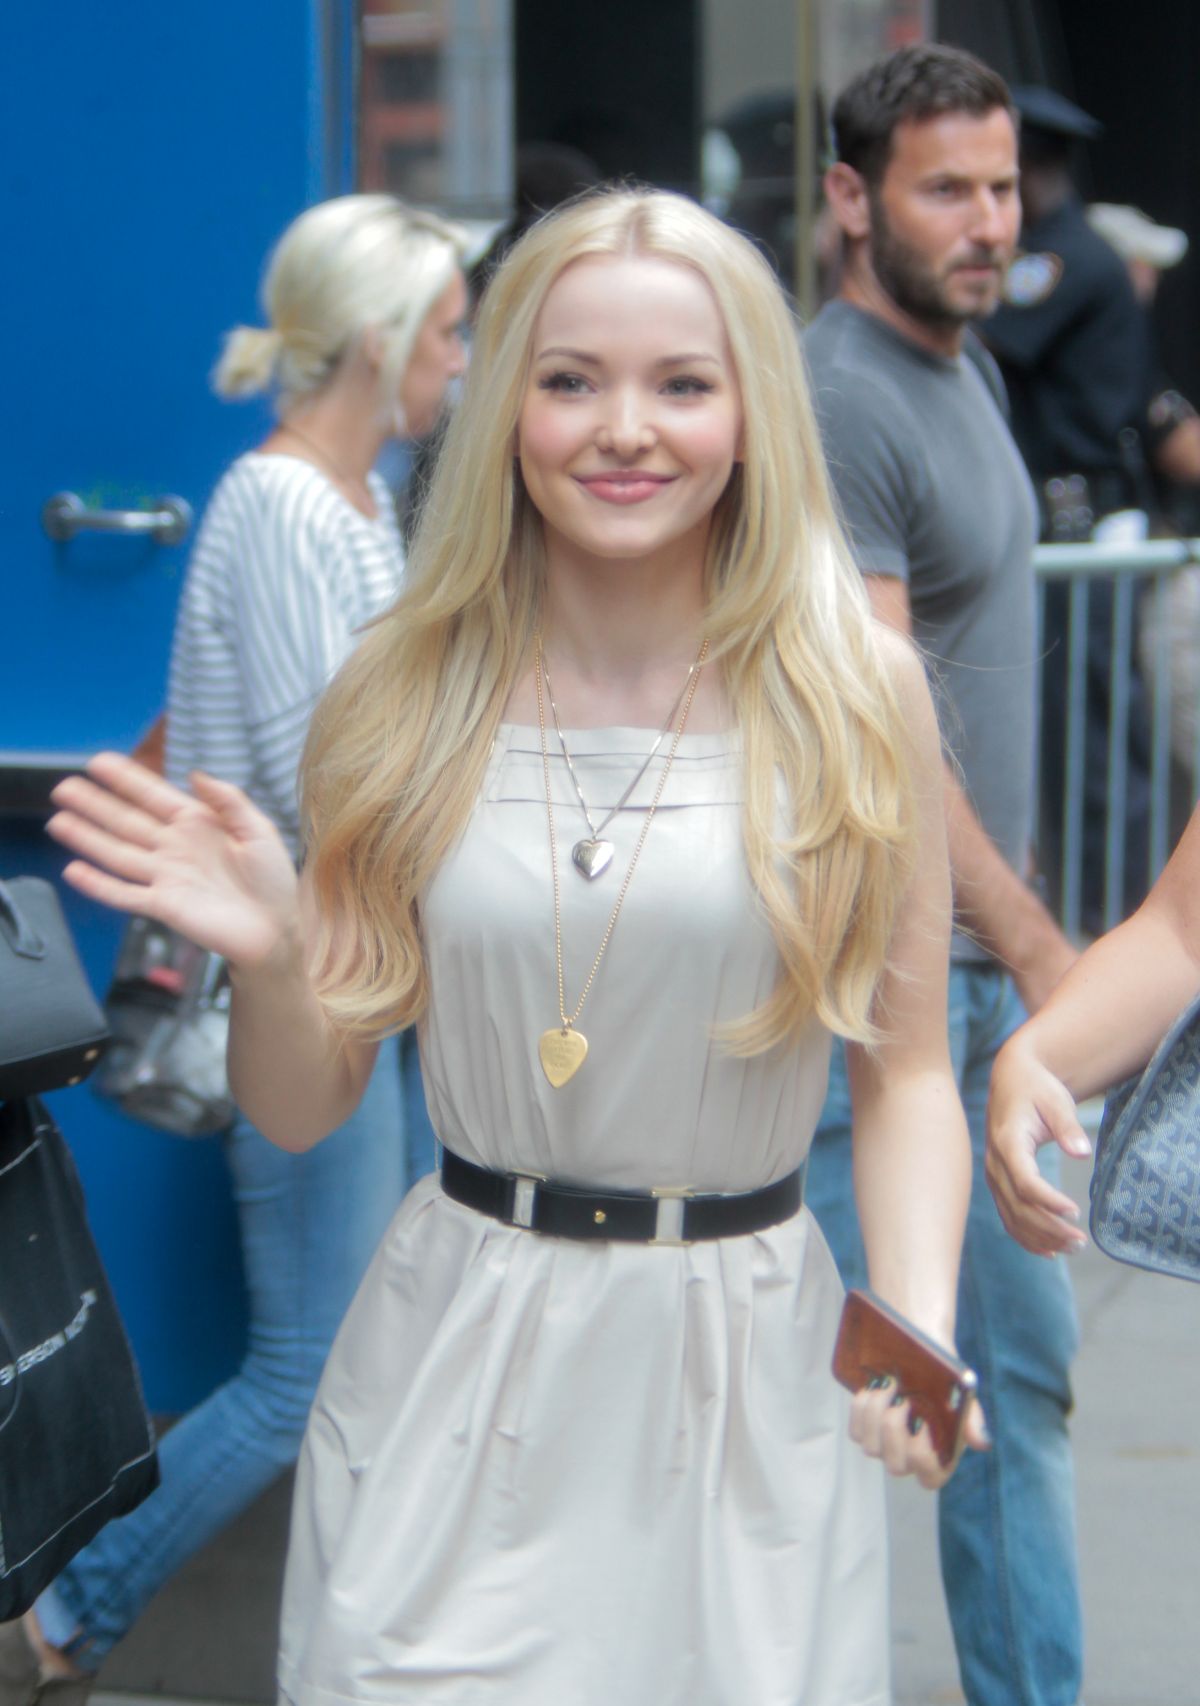 DOVE CAMERON at Good Morning America in New York 07/27/2015 – HawtCelebs